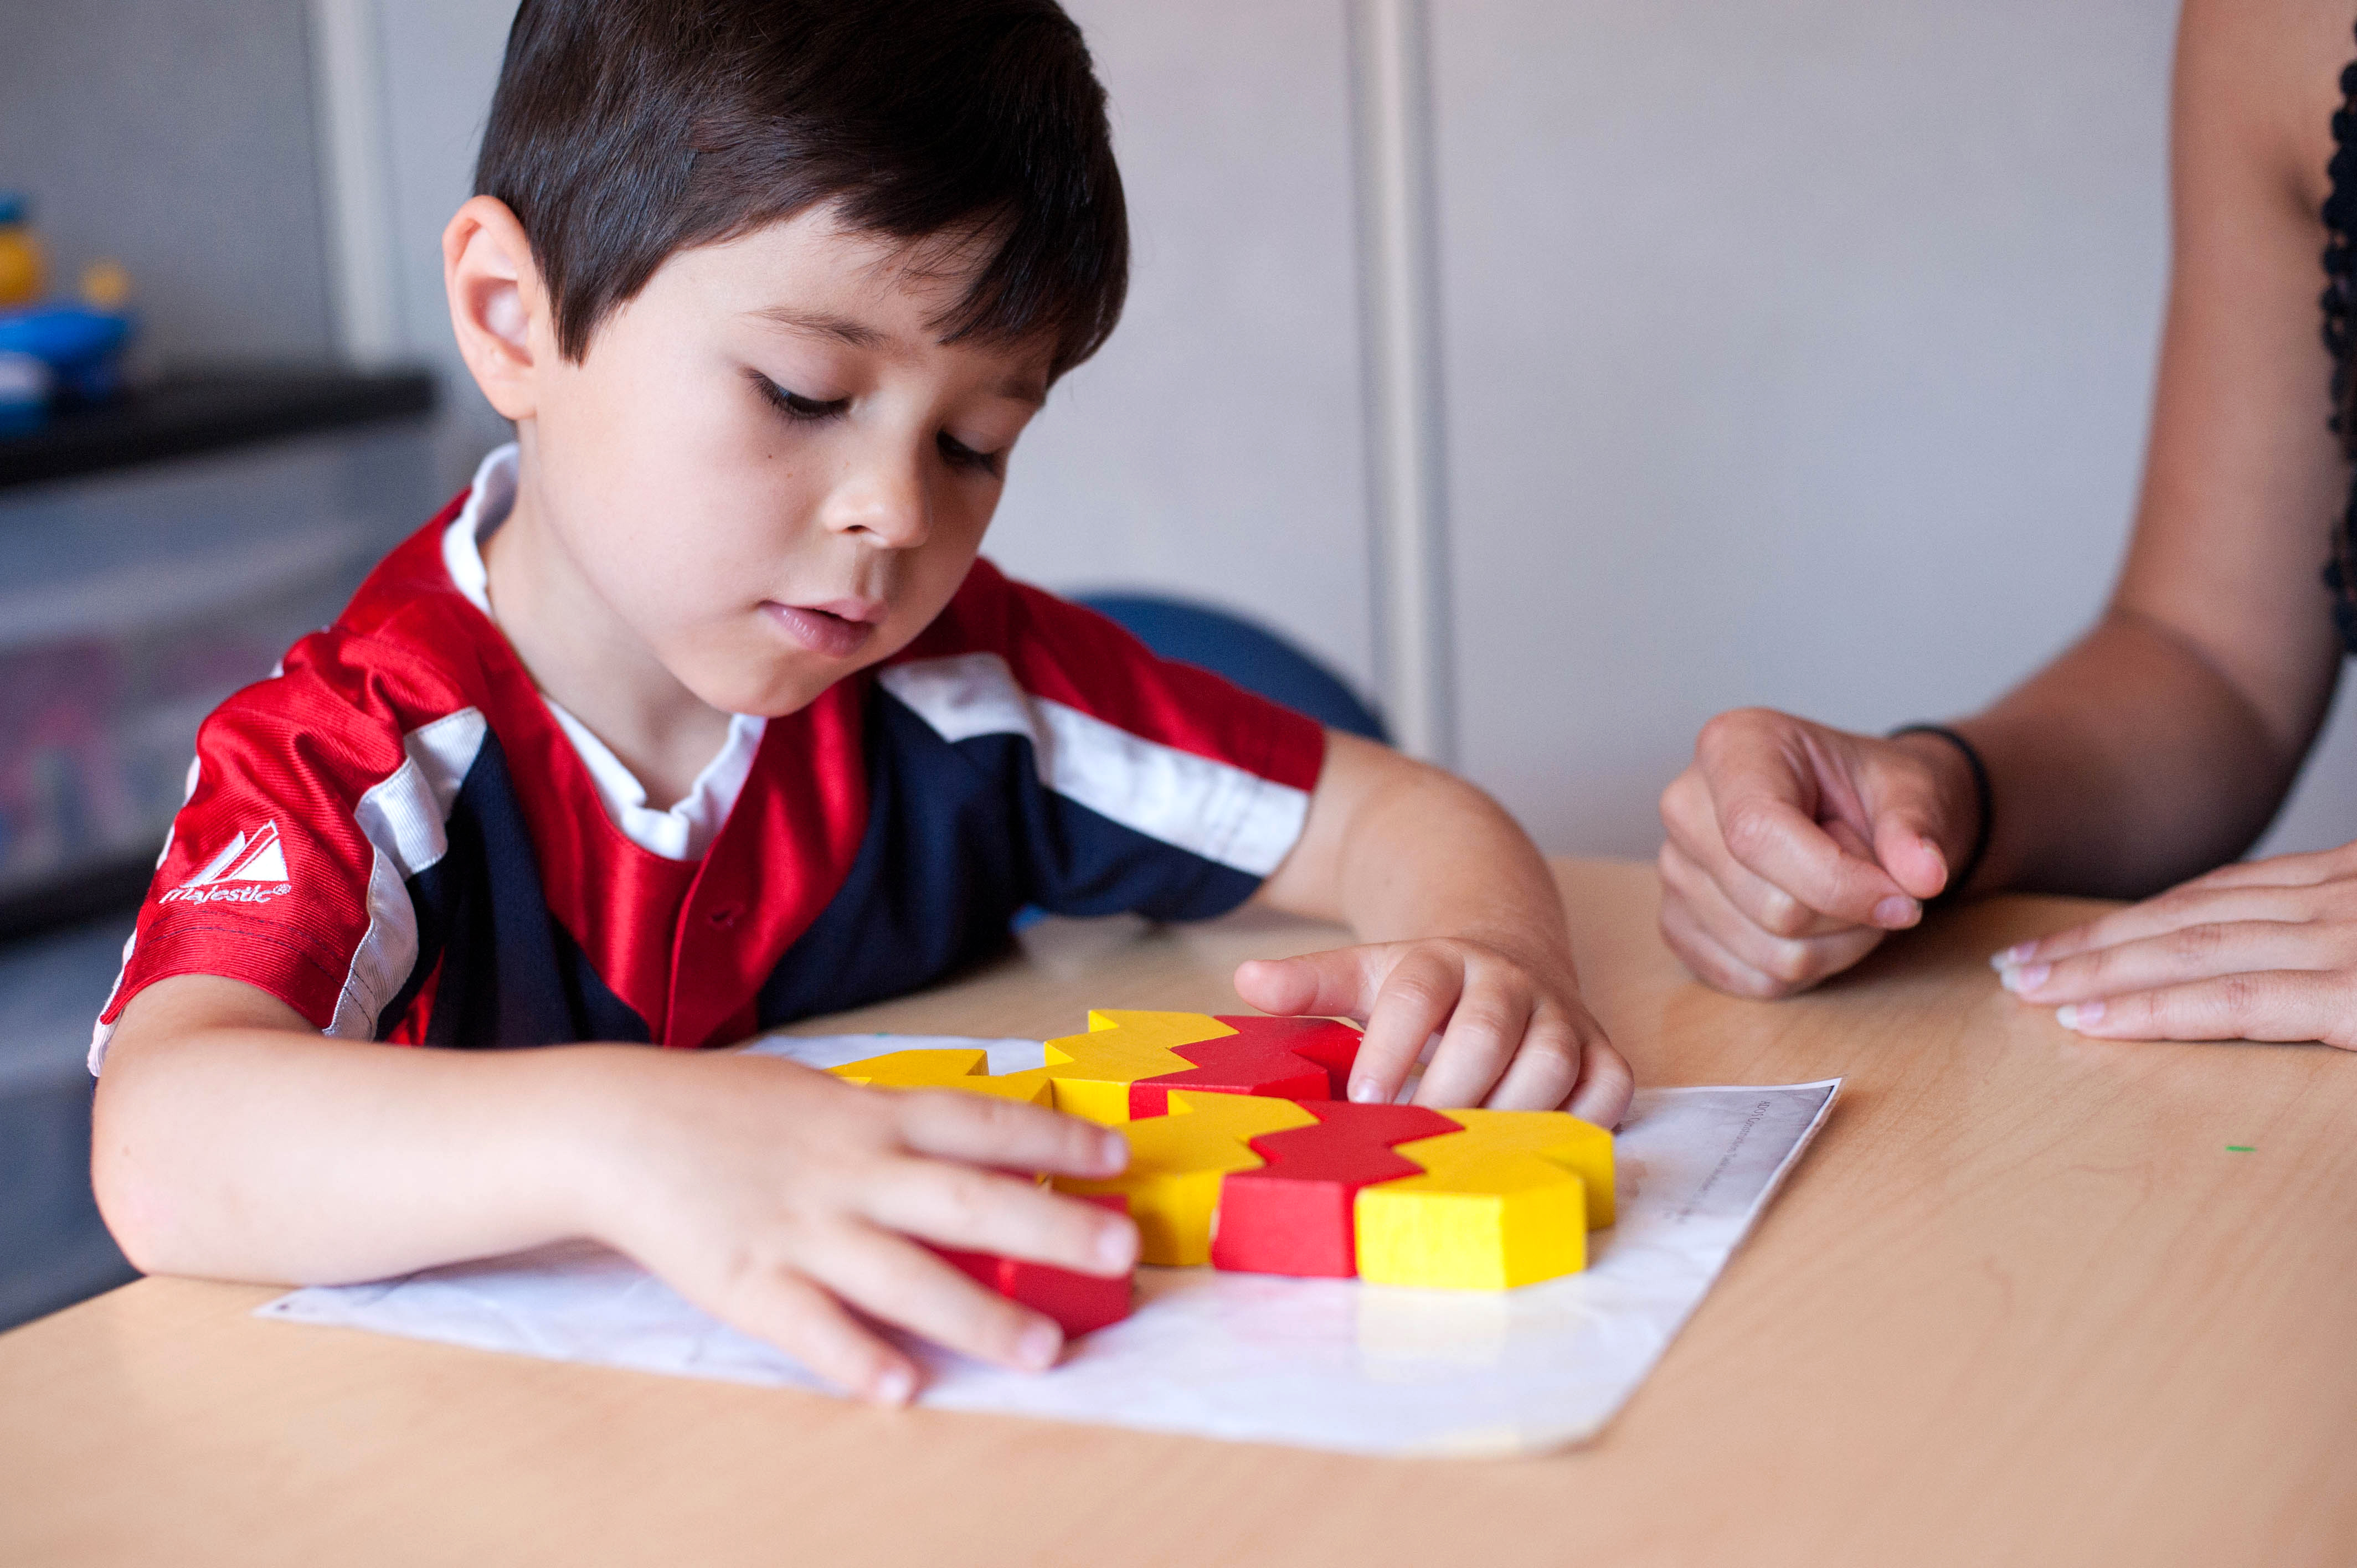 A child with dark hair plays with yellow and red squares at a table.